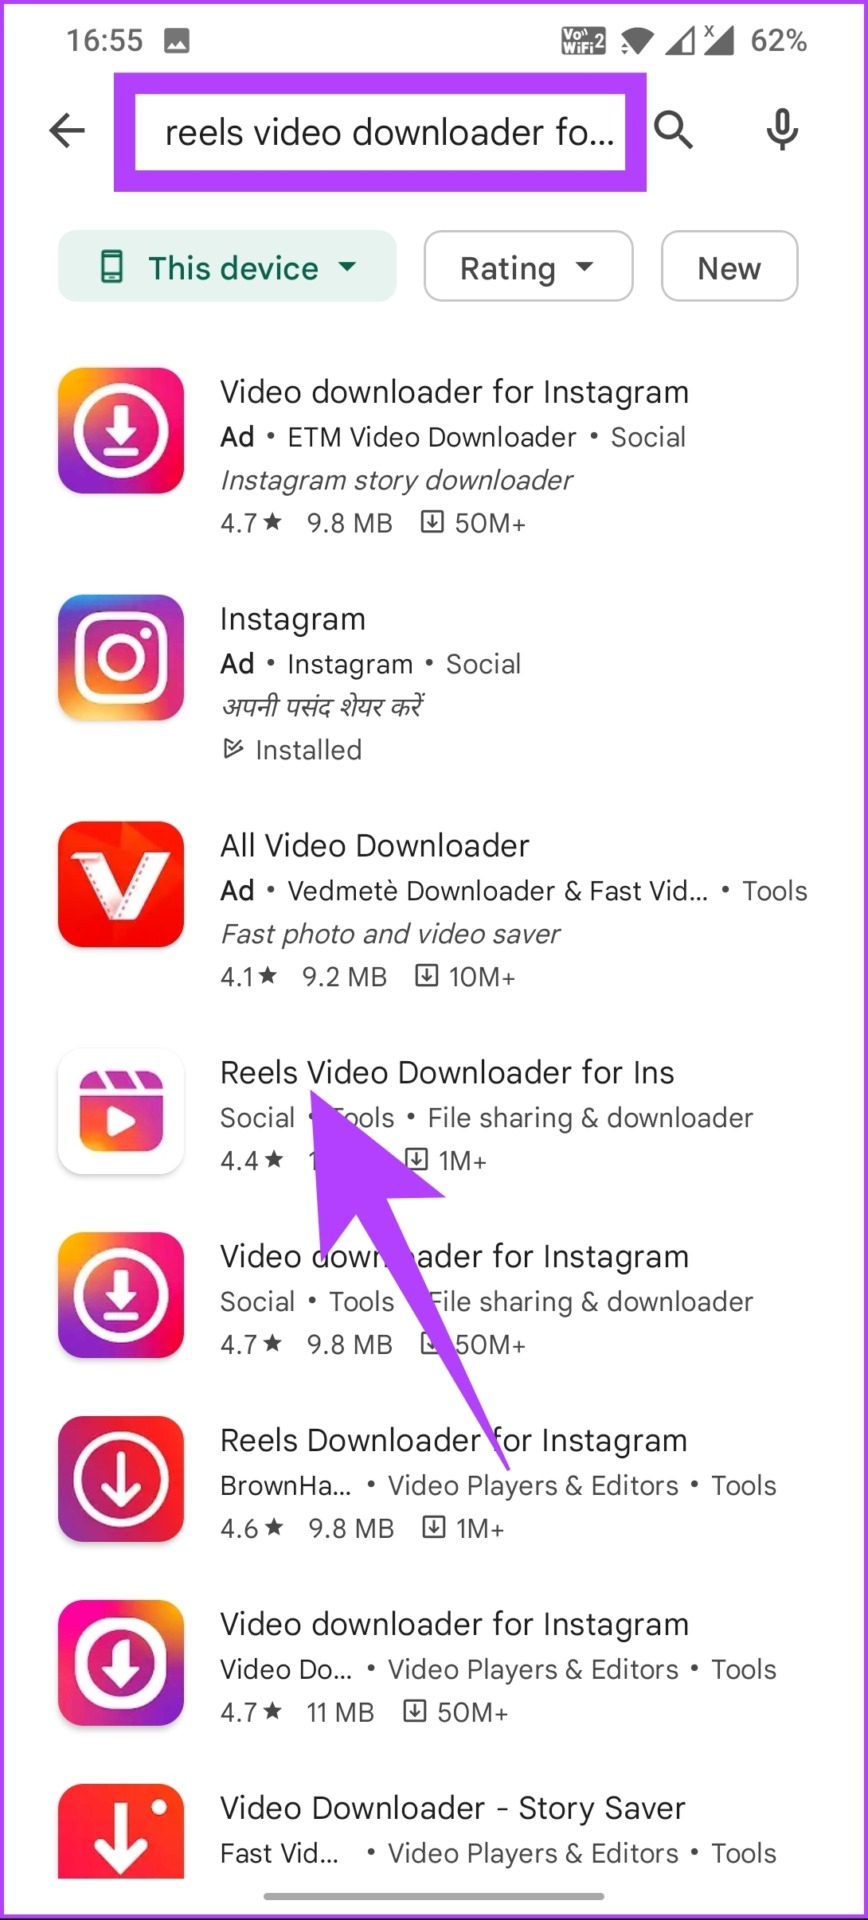 search Reels Video Downloader for Ins